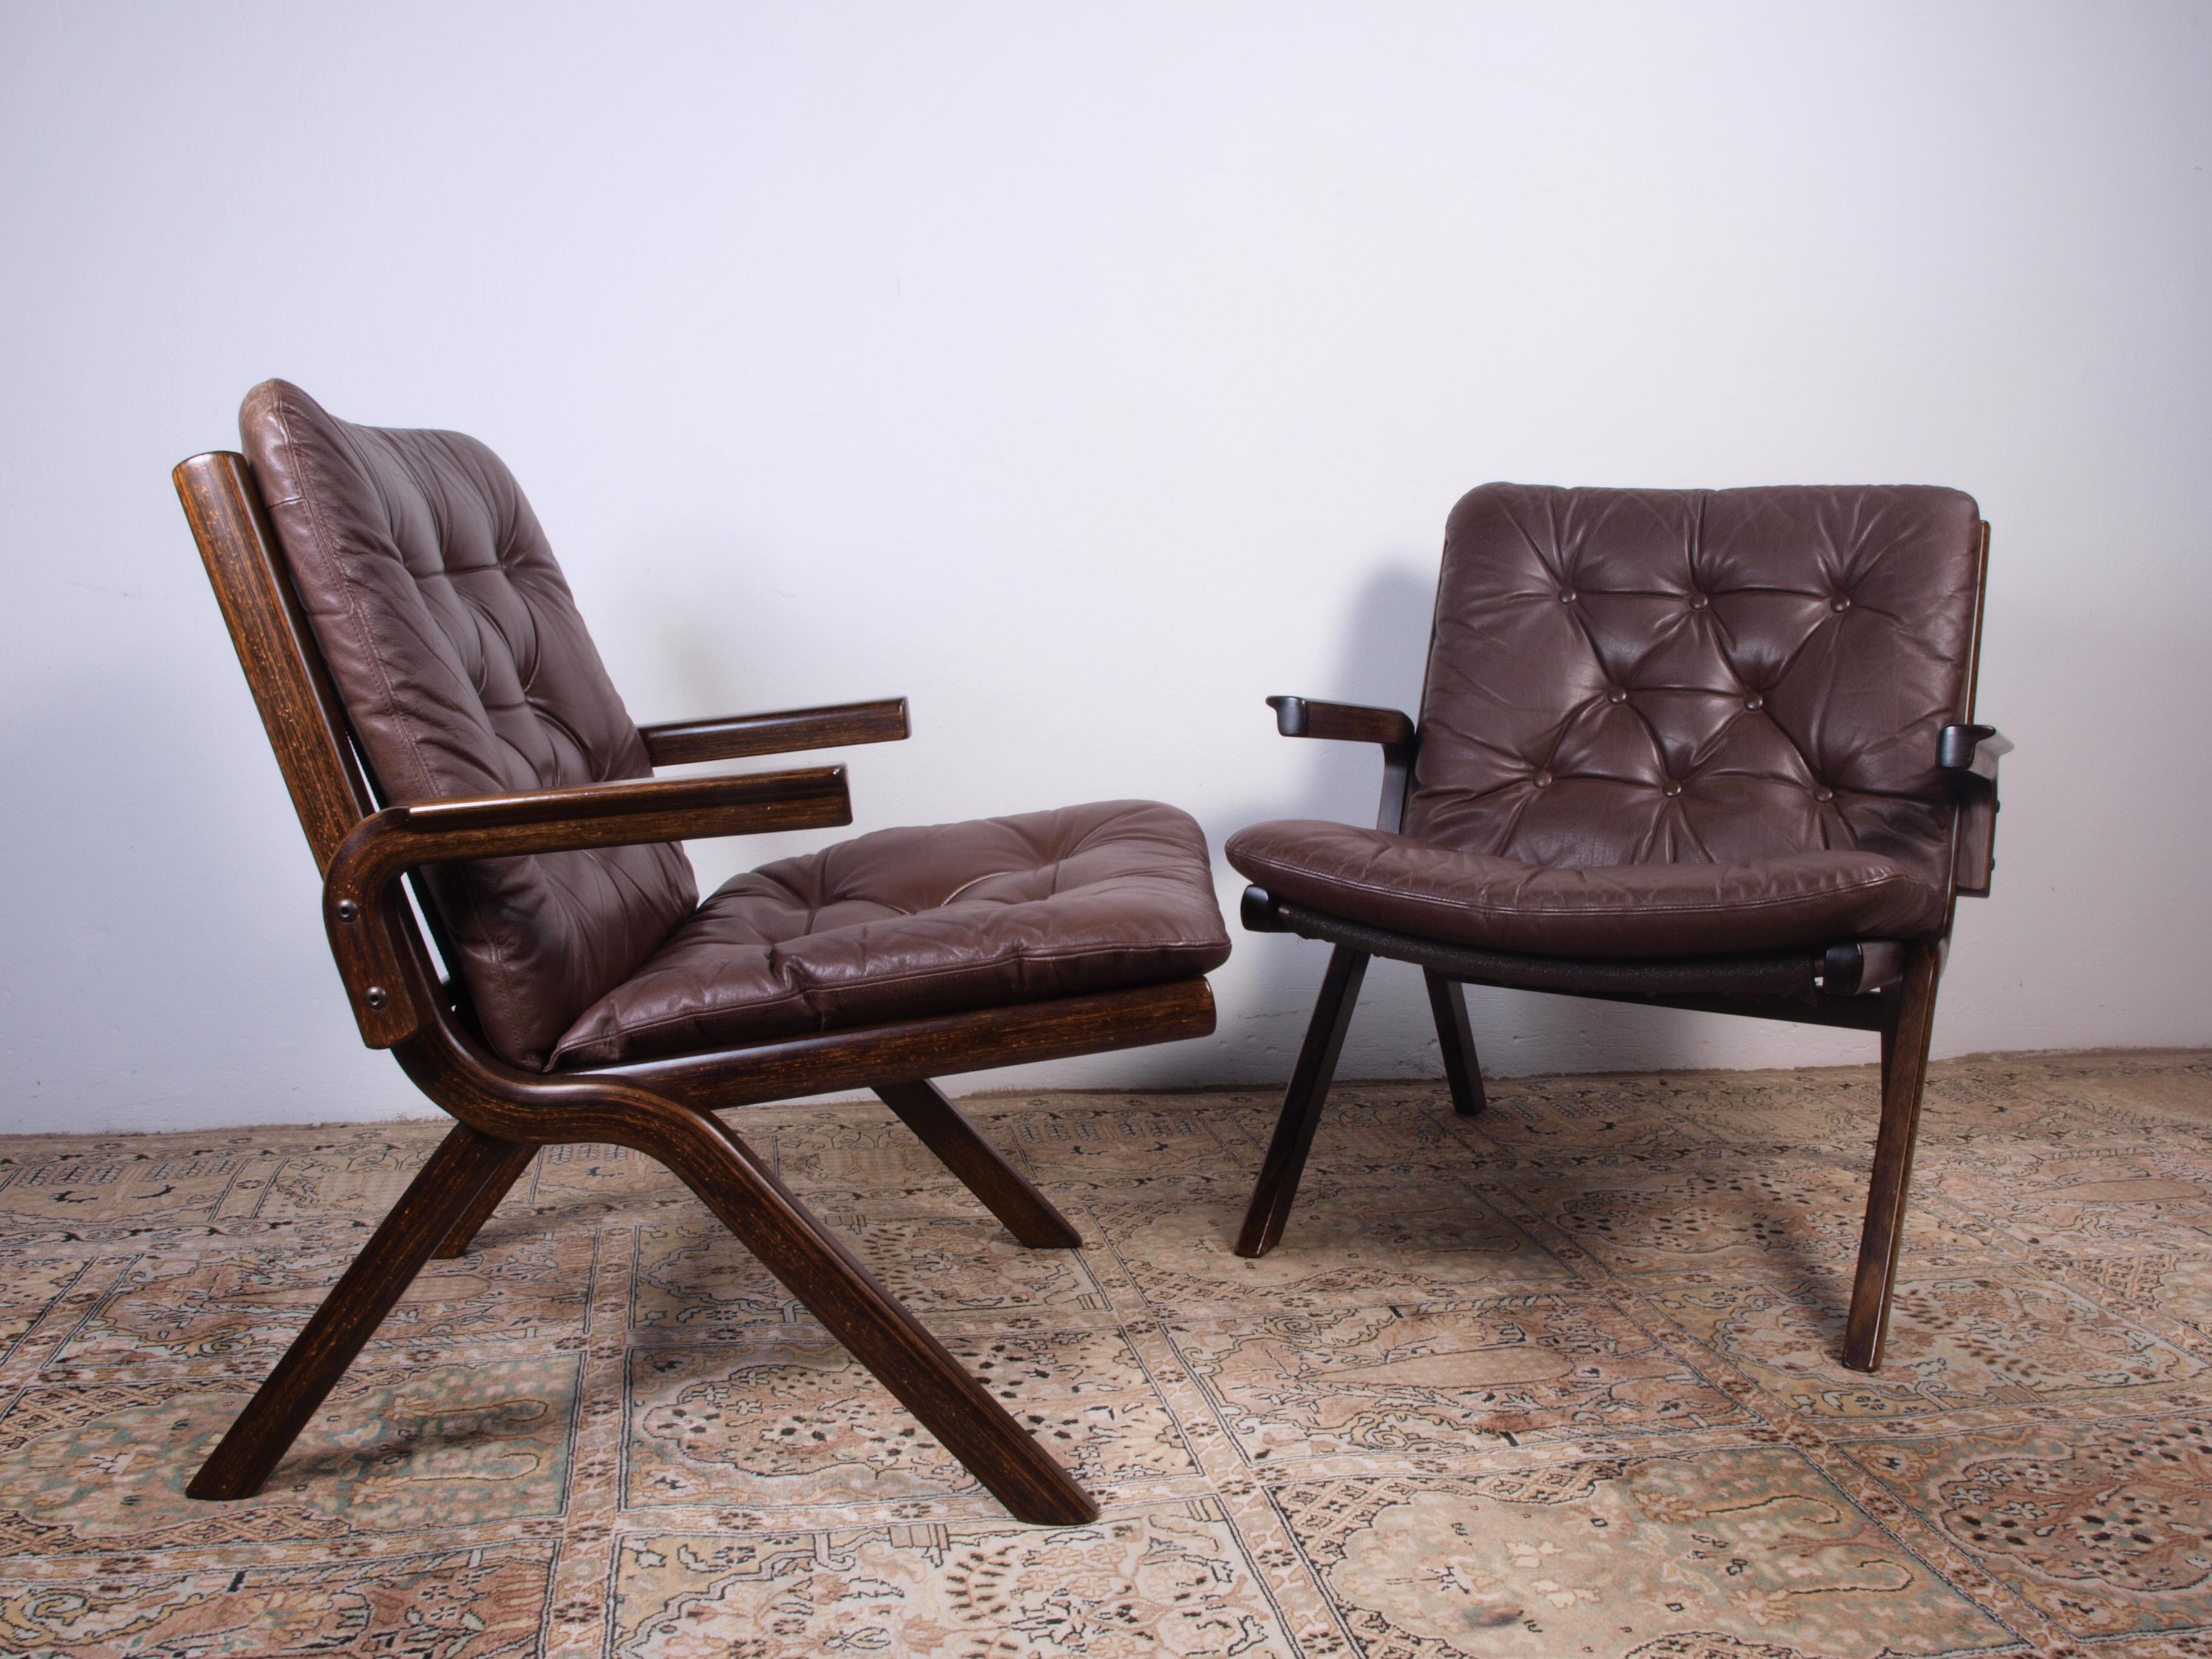 Crafted around 1960s in Norway, this vintage leather chair exudes timeless charm. Its curved, stained beechwood frame boasts a warm auburn tint, complementing the sumptuous brown leather adorning the seat and back. The sinuous design, a hallmark of